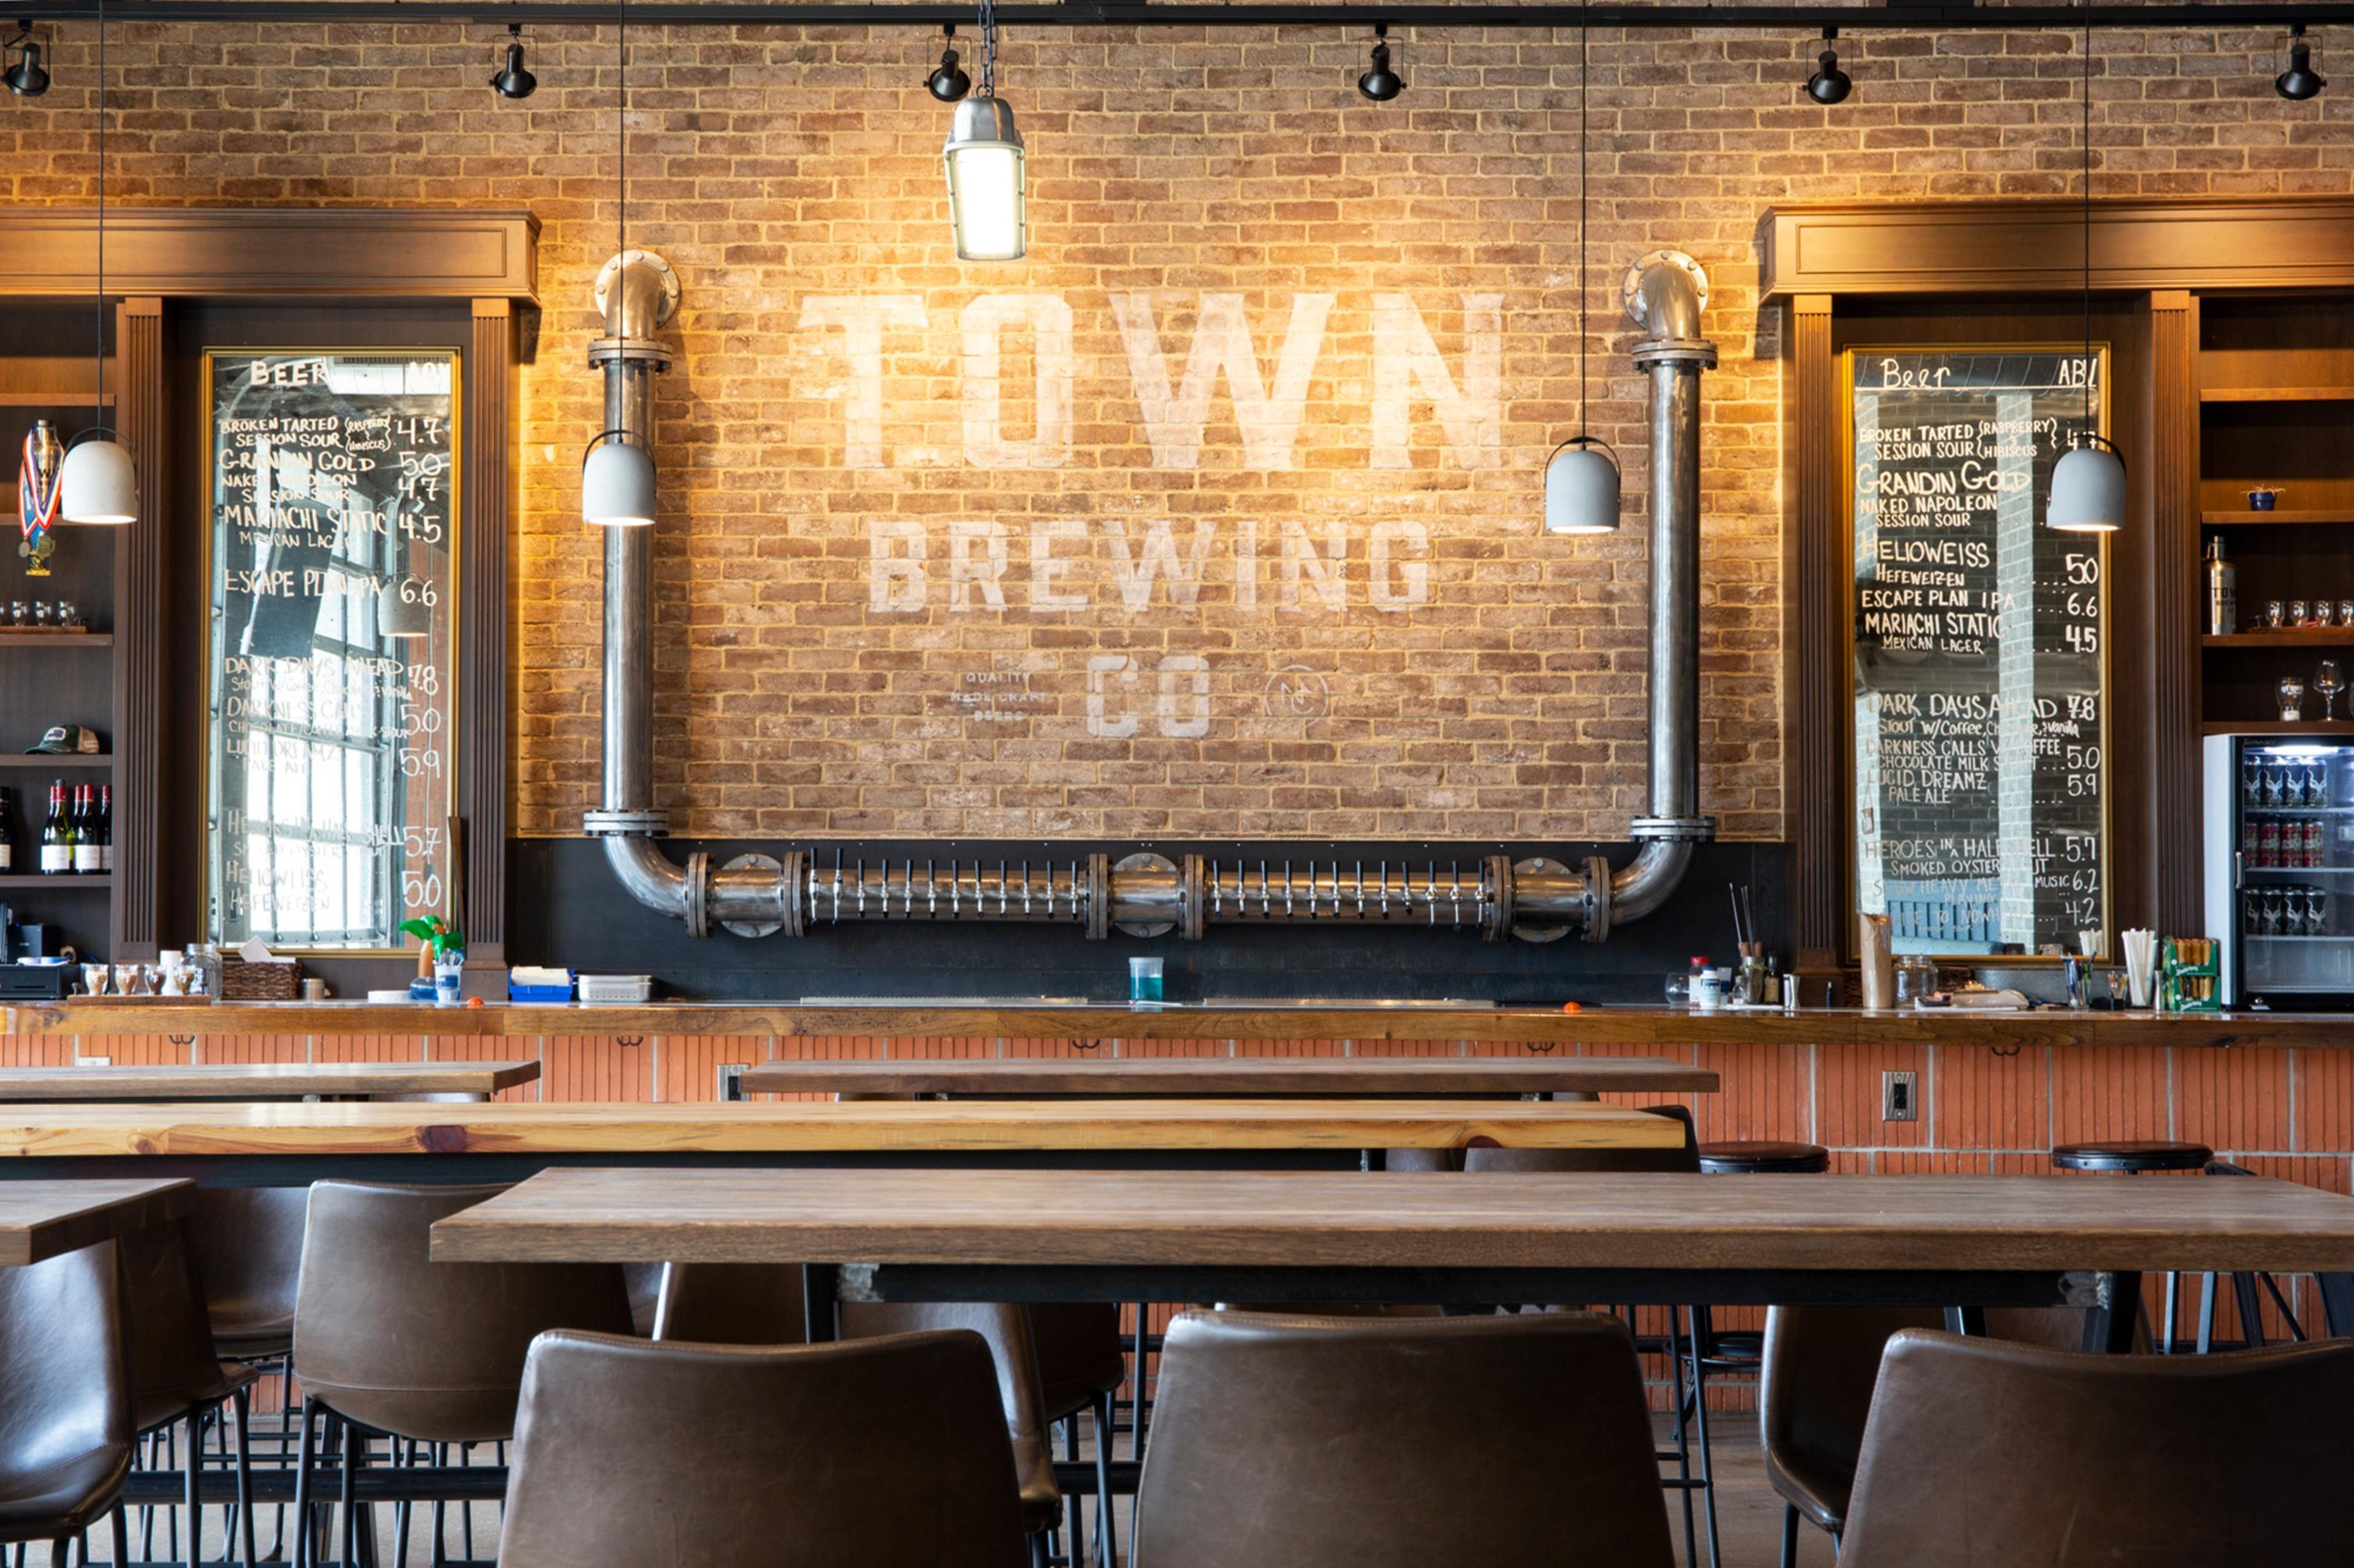 Town Brewing Company